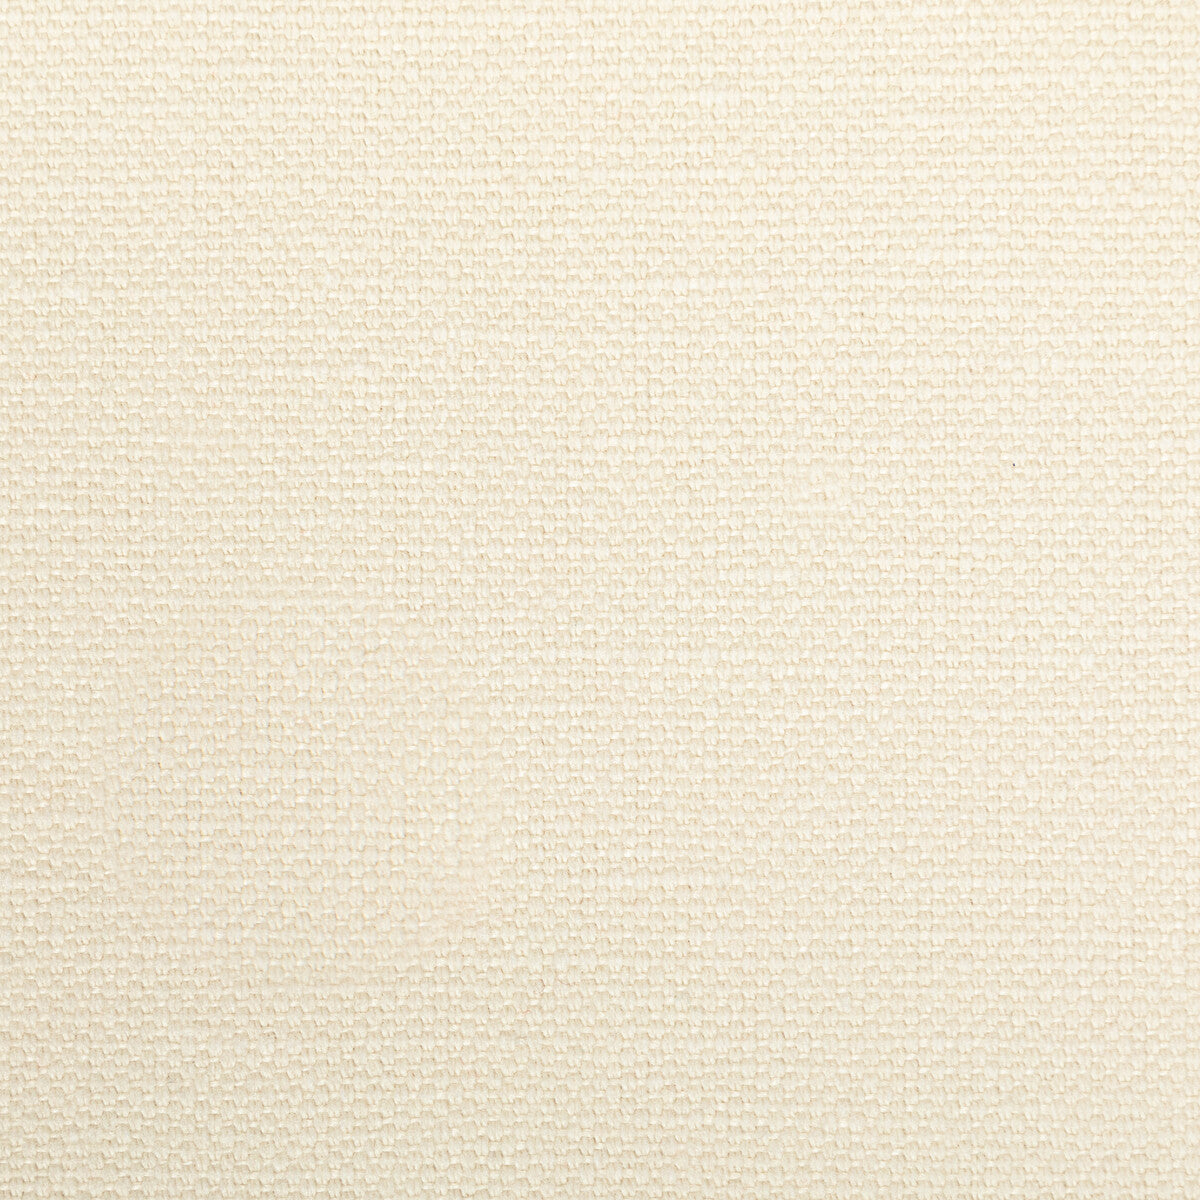 Carson fabric in ivory color - pattern 36282.1.0 - by Kravet Basics